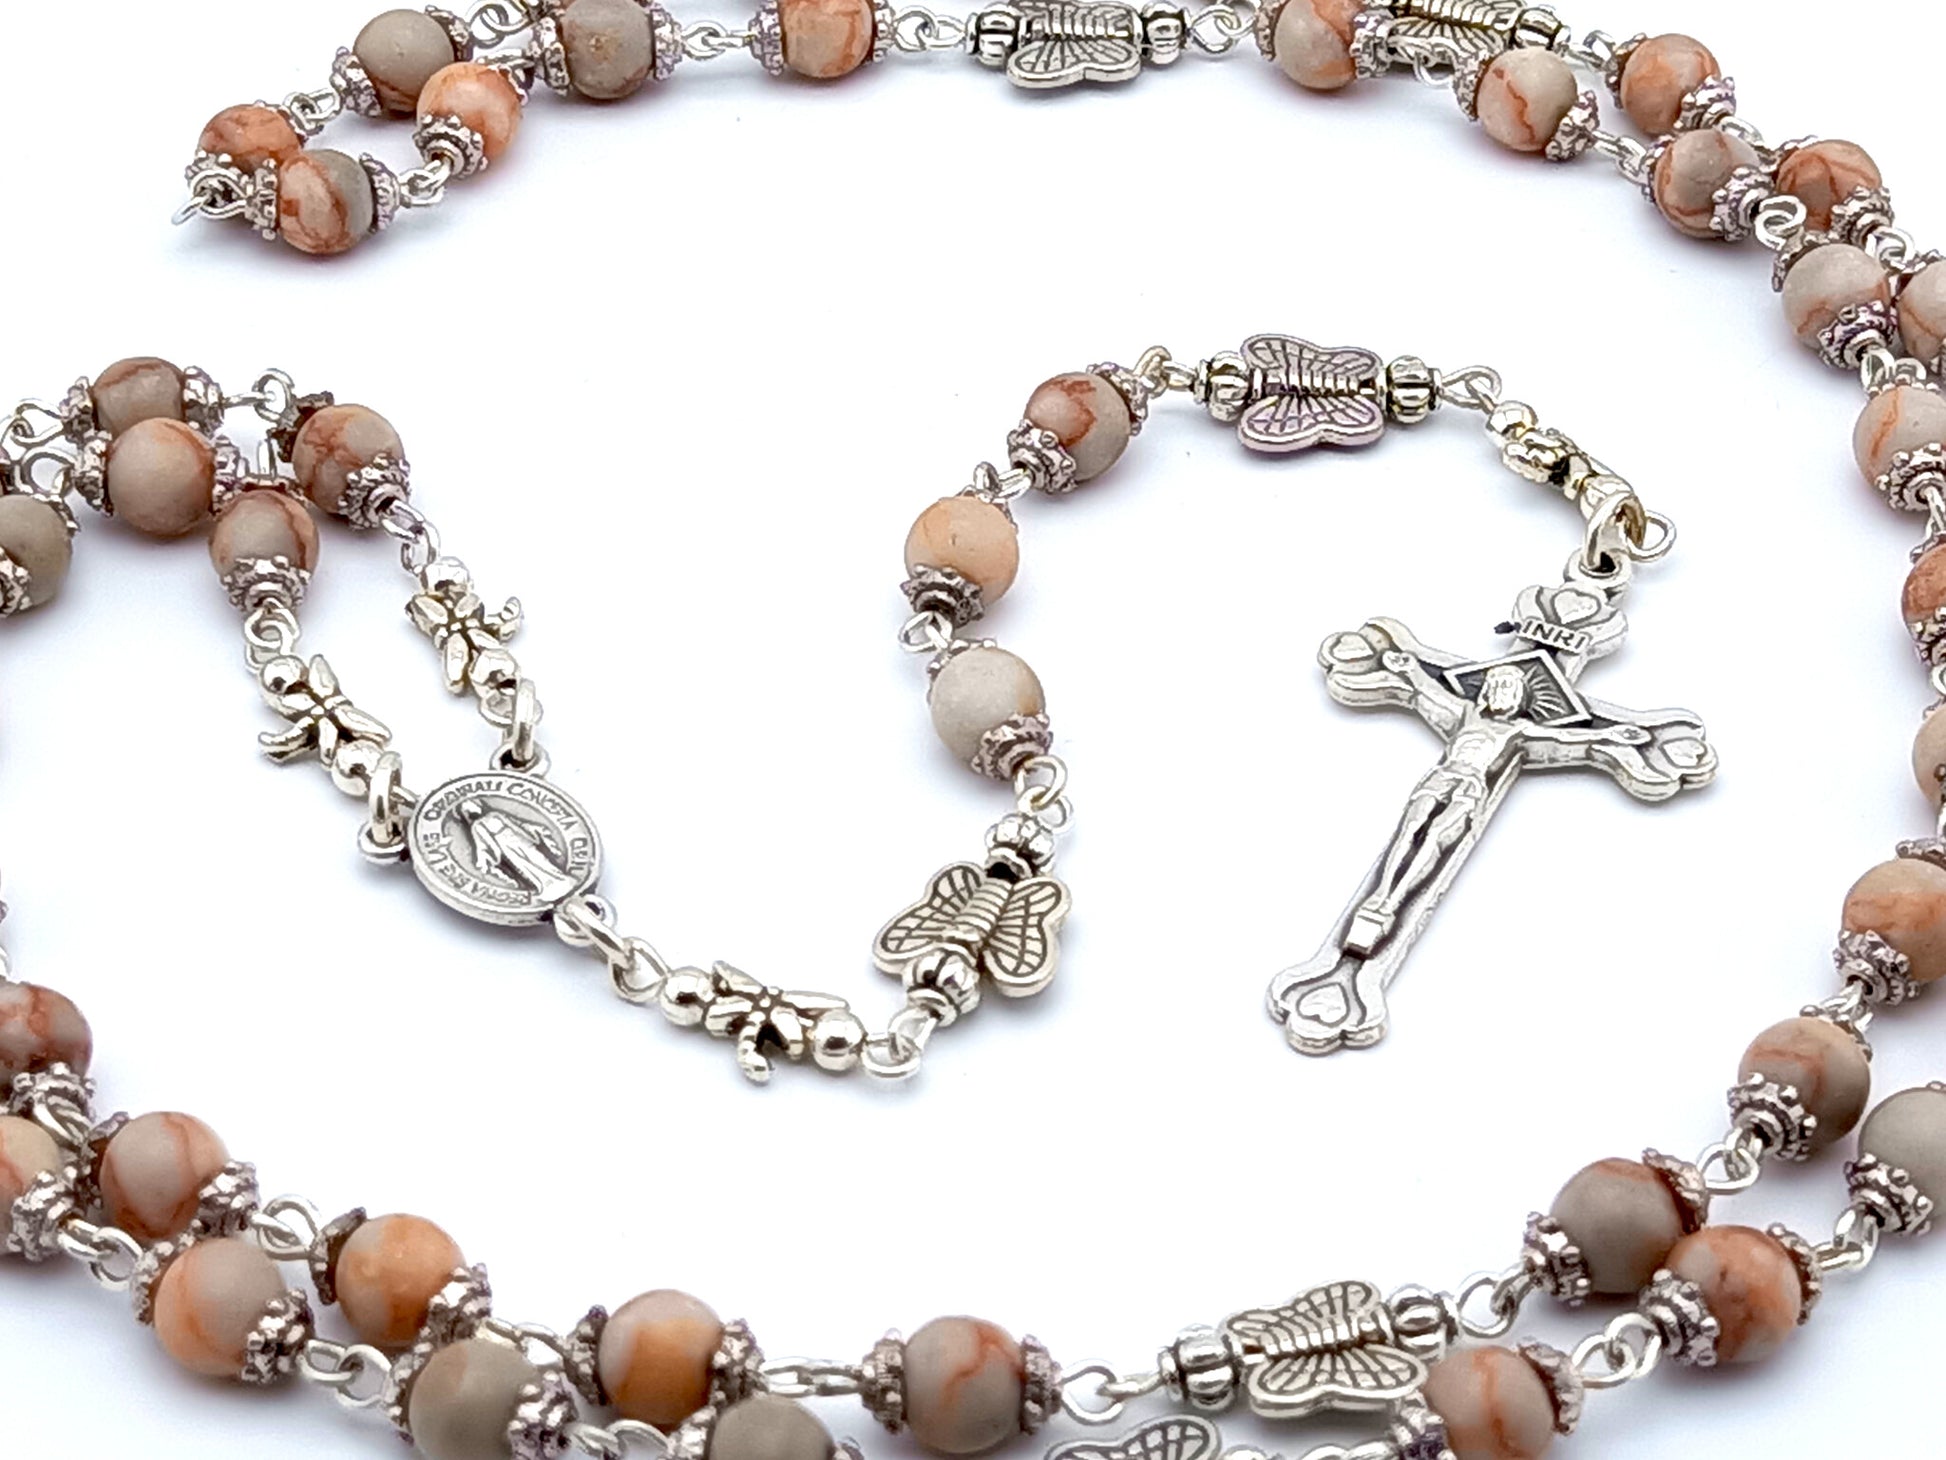 Miraculous Medal unique rosary beads with bloodstone and silver butterfly beads, silver crucifix and Miraculous medal centre.